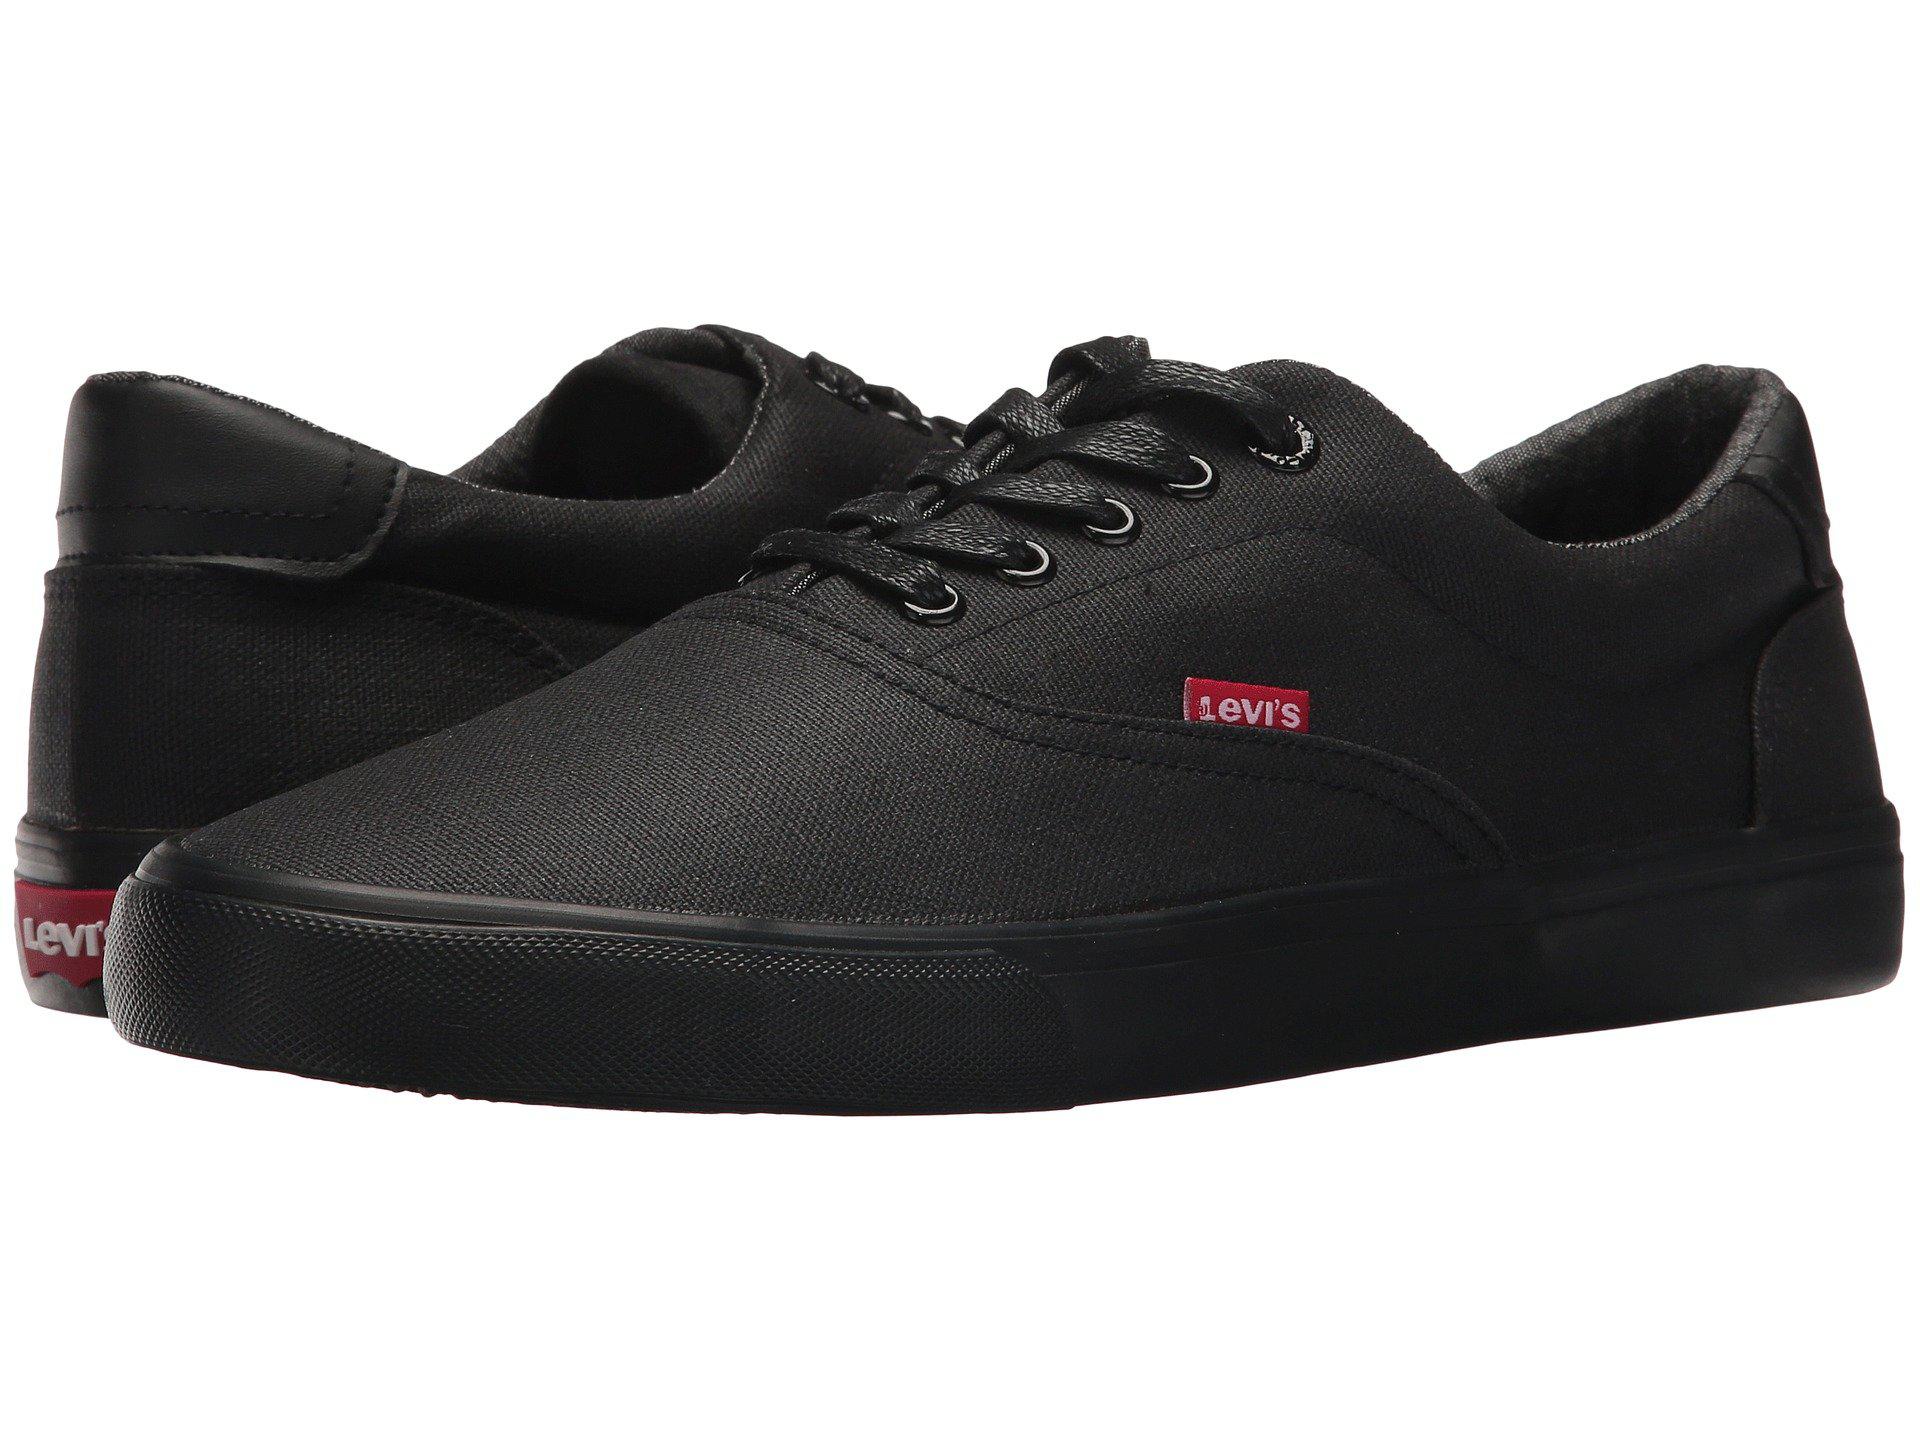 Levi's Sneakers Mens new Zealand, SAVE 59% 